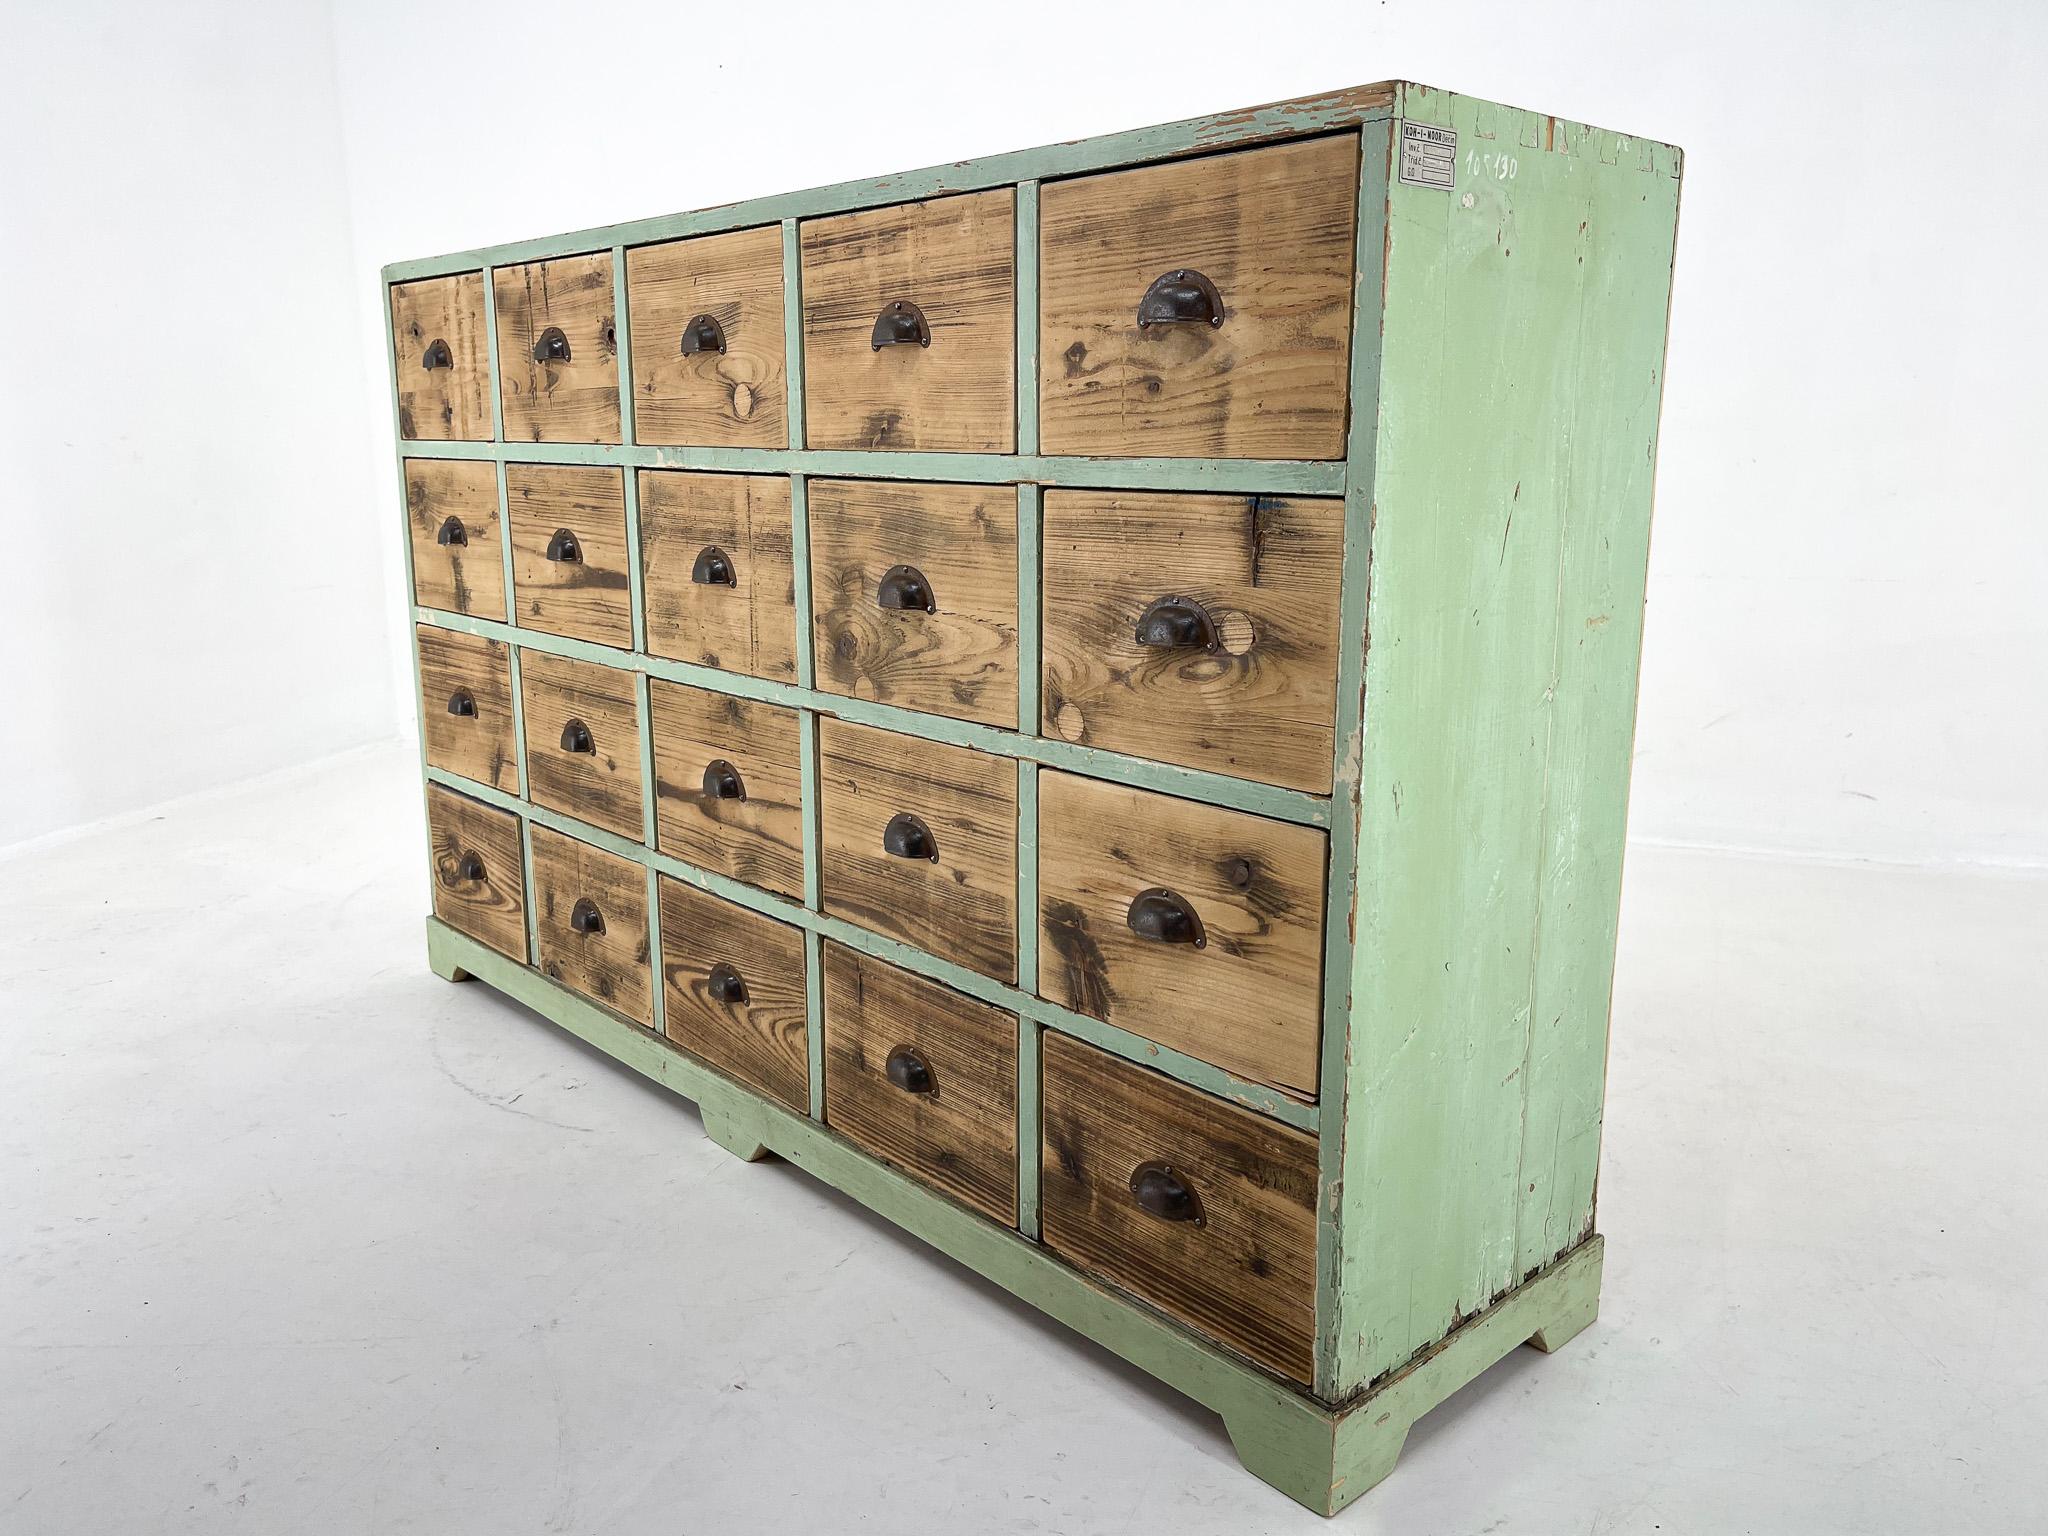 Amazing industrial wooden cabinet with 20 drawers with original metal handles. This vintage filling cabinet was rescued from the famous KOH-I-NOOR factory in former Czechoslovakia. You can find the mark on the side of the cabinet. Some of the drawer